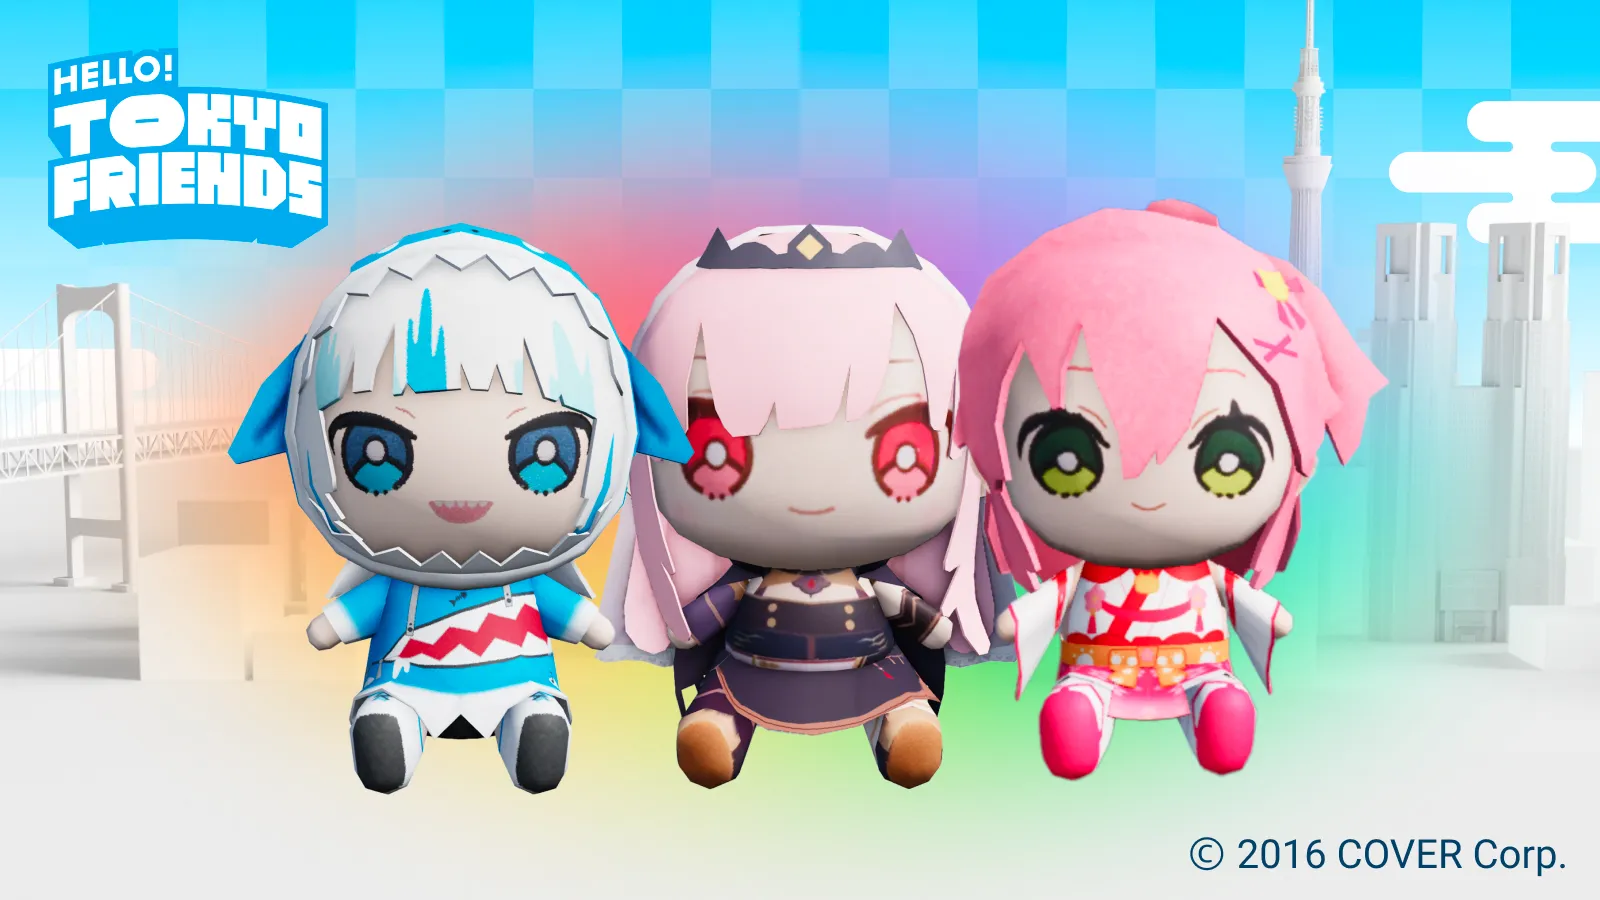 Receive Limited Items of VTubers Sakura Miko, Mori Calliope, and Gawr Gura in Tokyo Tourism’s Metaverse Space “HELLO! TOKYO FRIENDS” by Roblox